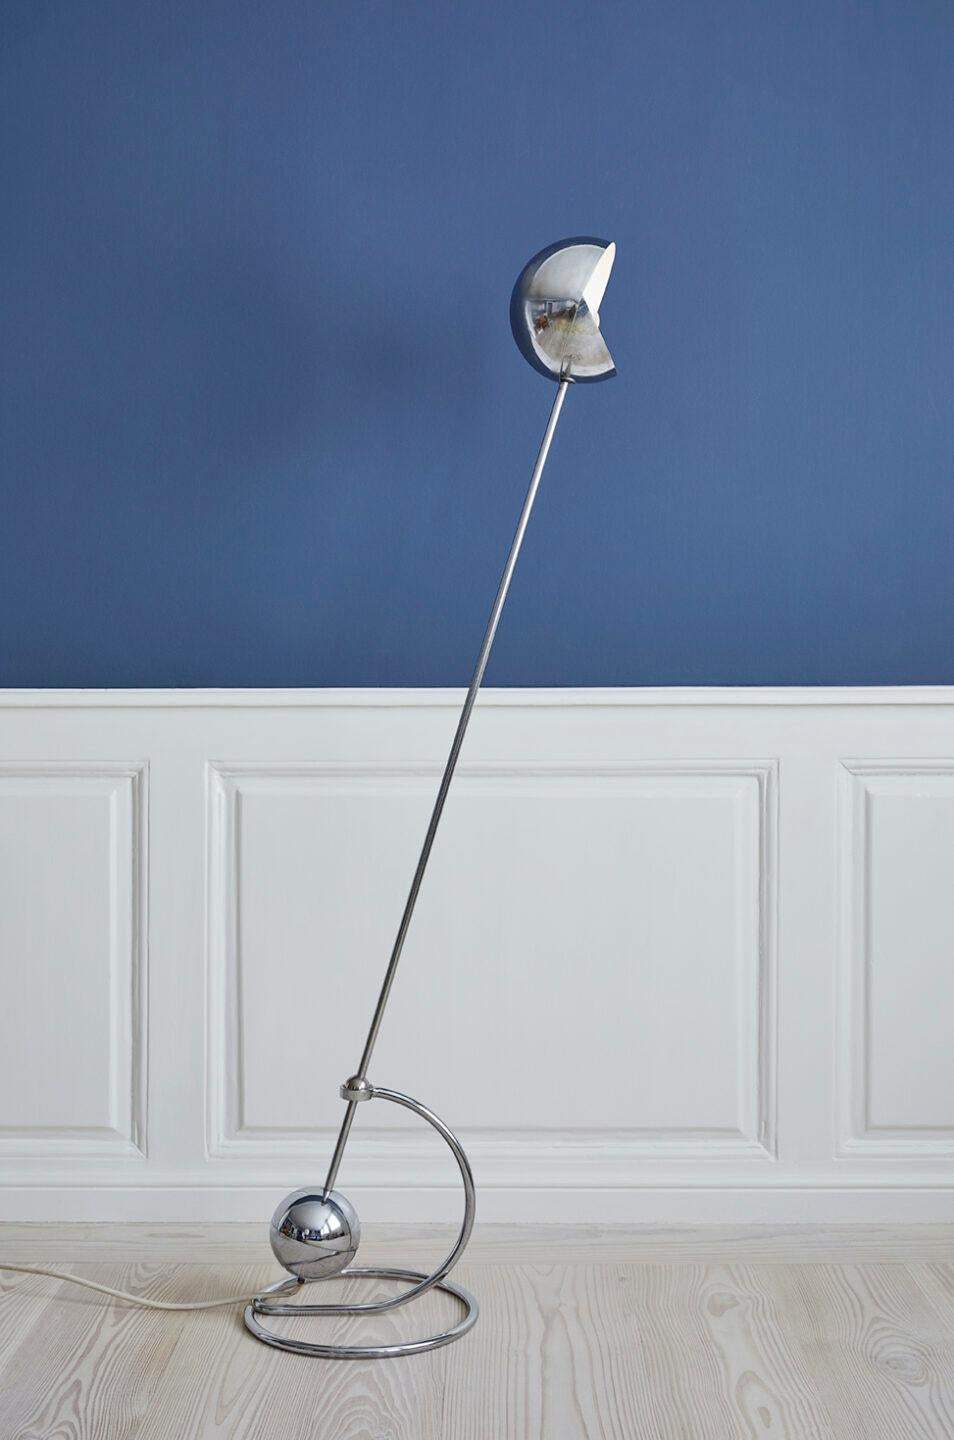 Paolo Tilche
Italy, 1970's

Adjustable floor lamp ‘3S’ in chrome plated metal. Produced by Sirrah.
The large, chrome-plated metal counter weight keeps the long arm perfectly balenced in the tubular base. 

H 147 x Ø 32 cm

